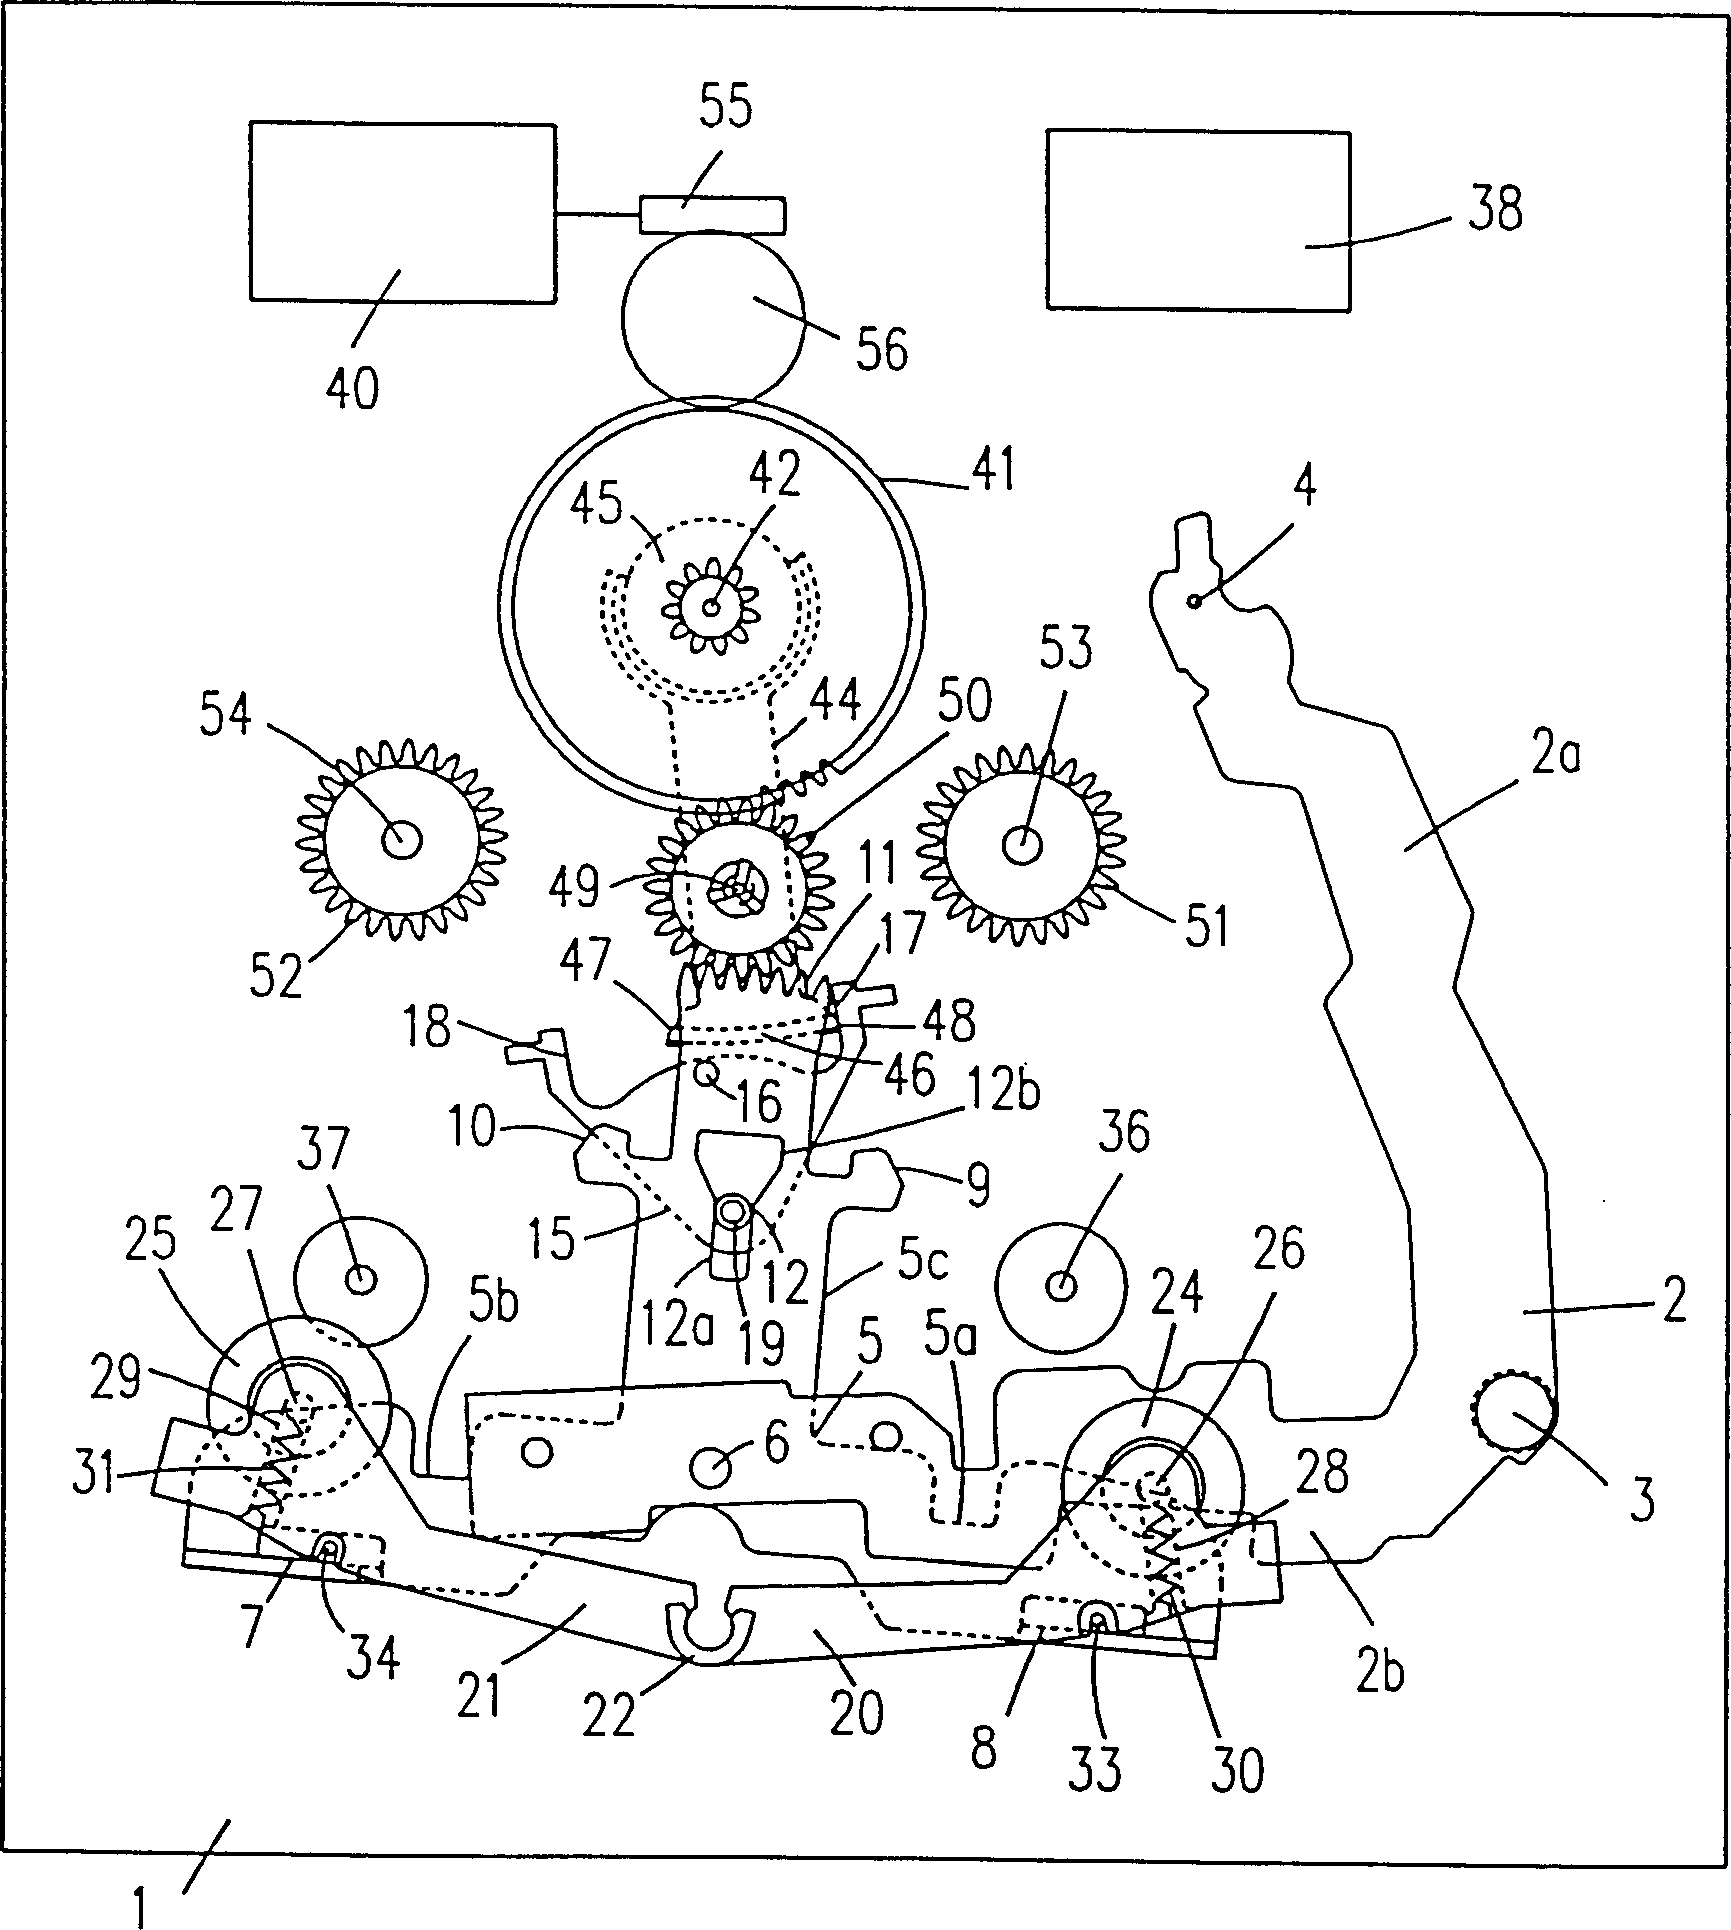 Auto-reverse tape deck comprising switching device